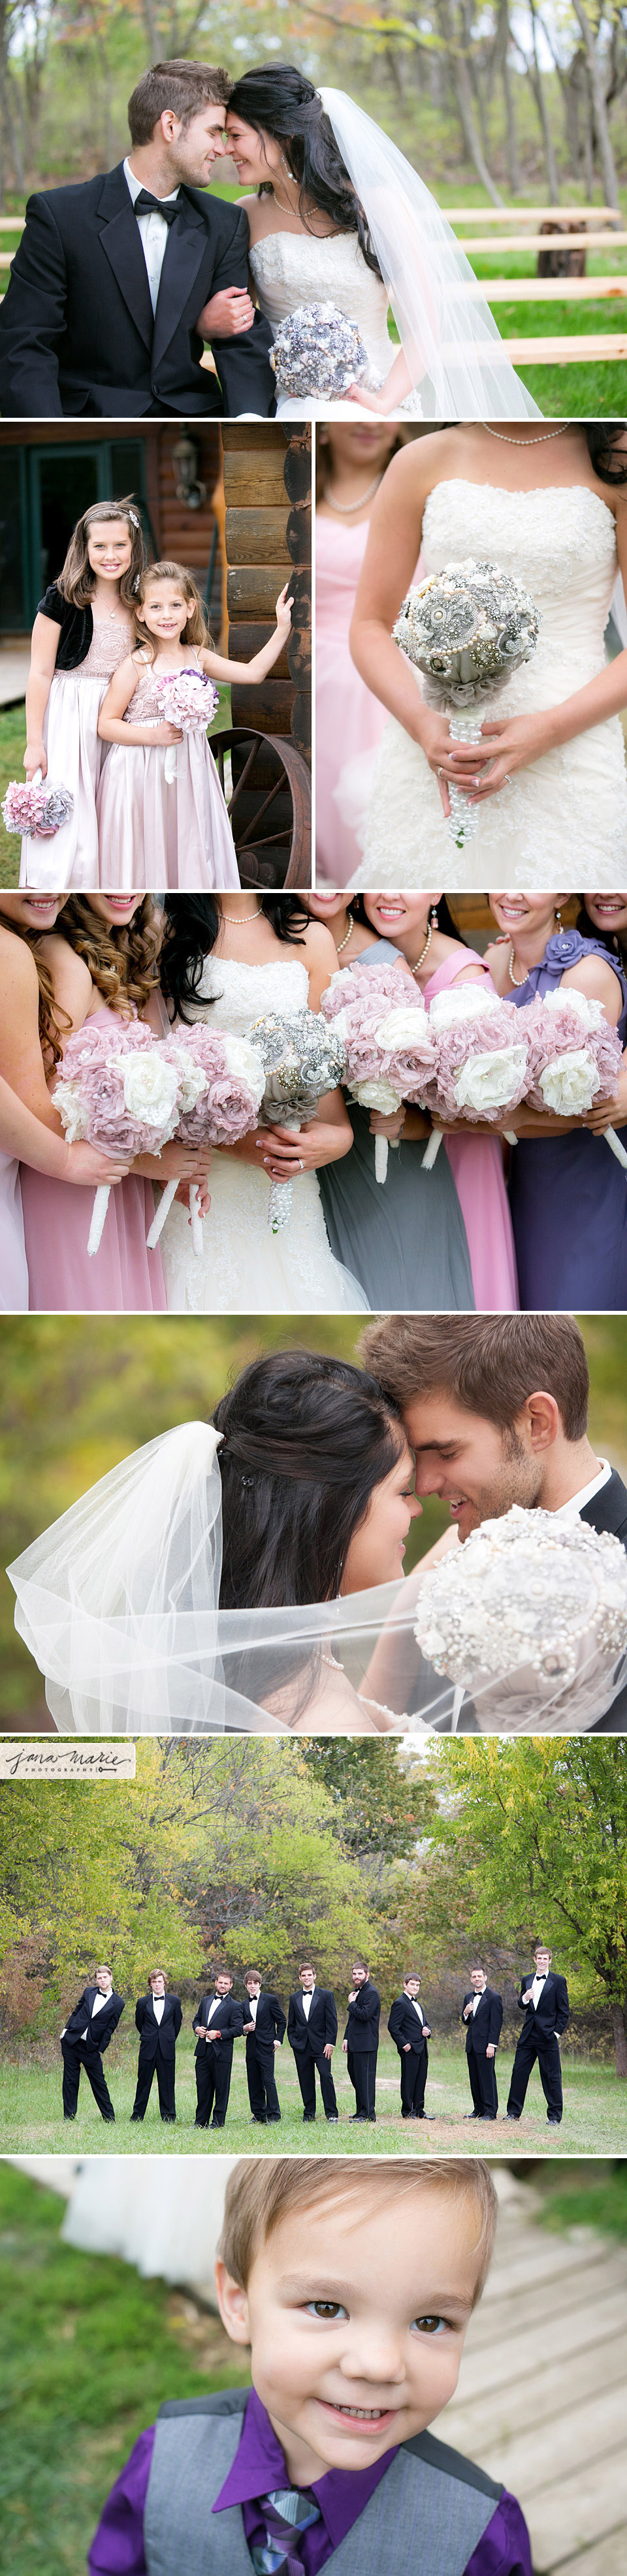 Jana Marie Photos, Hand made bouquets, bride and groom, love, couples, KC weddings